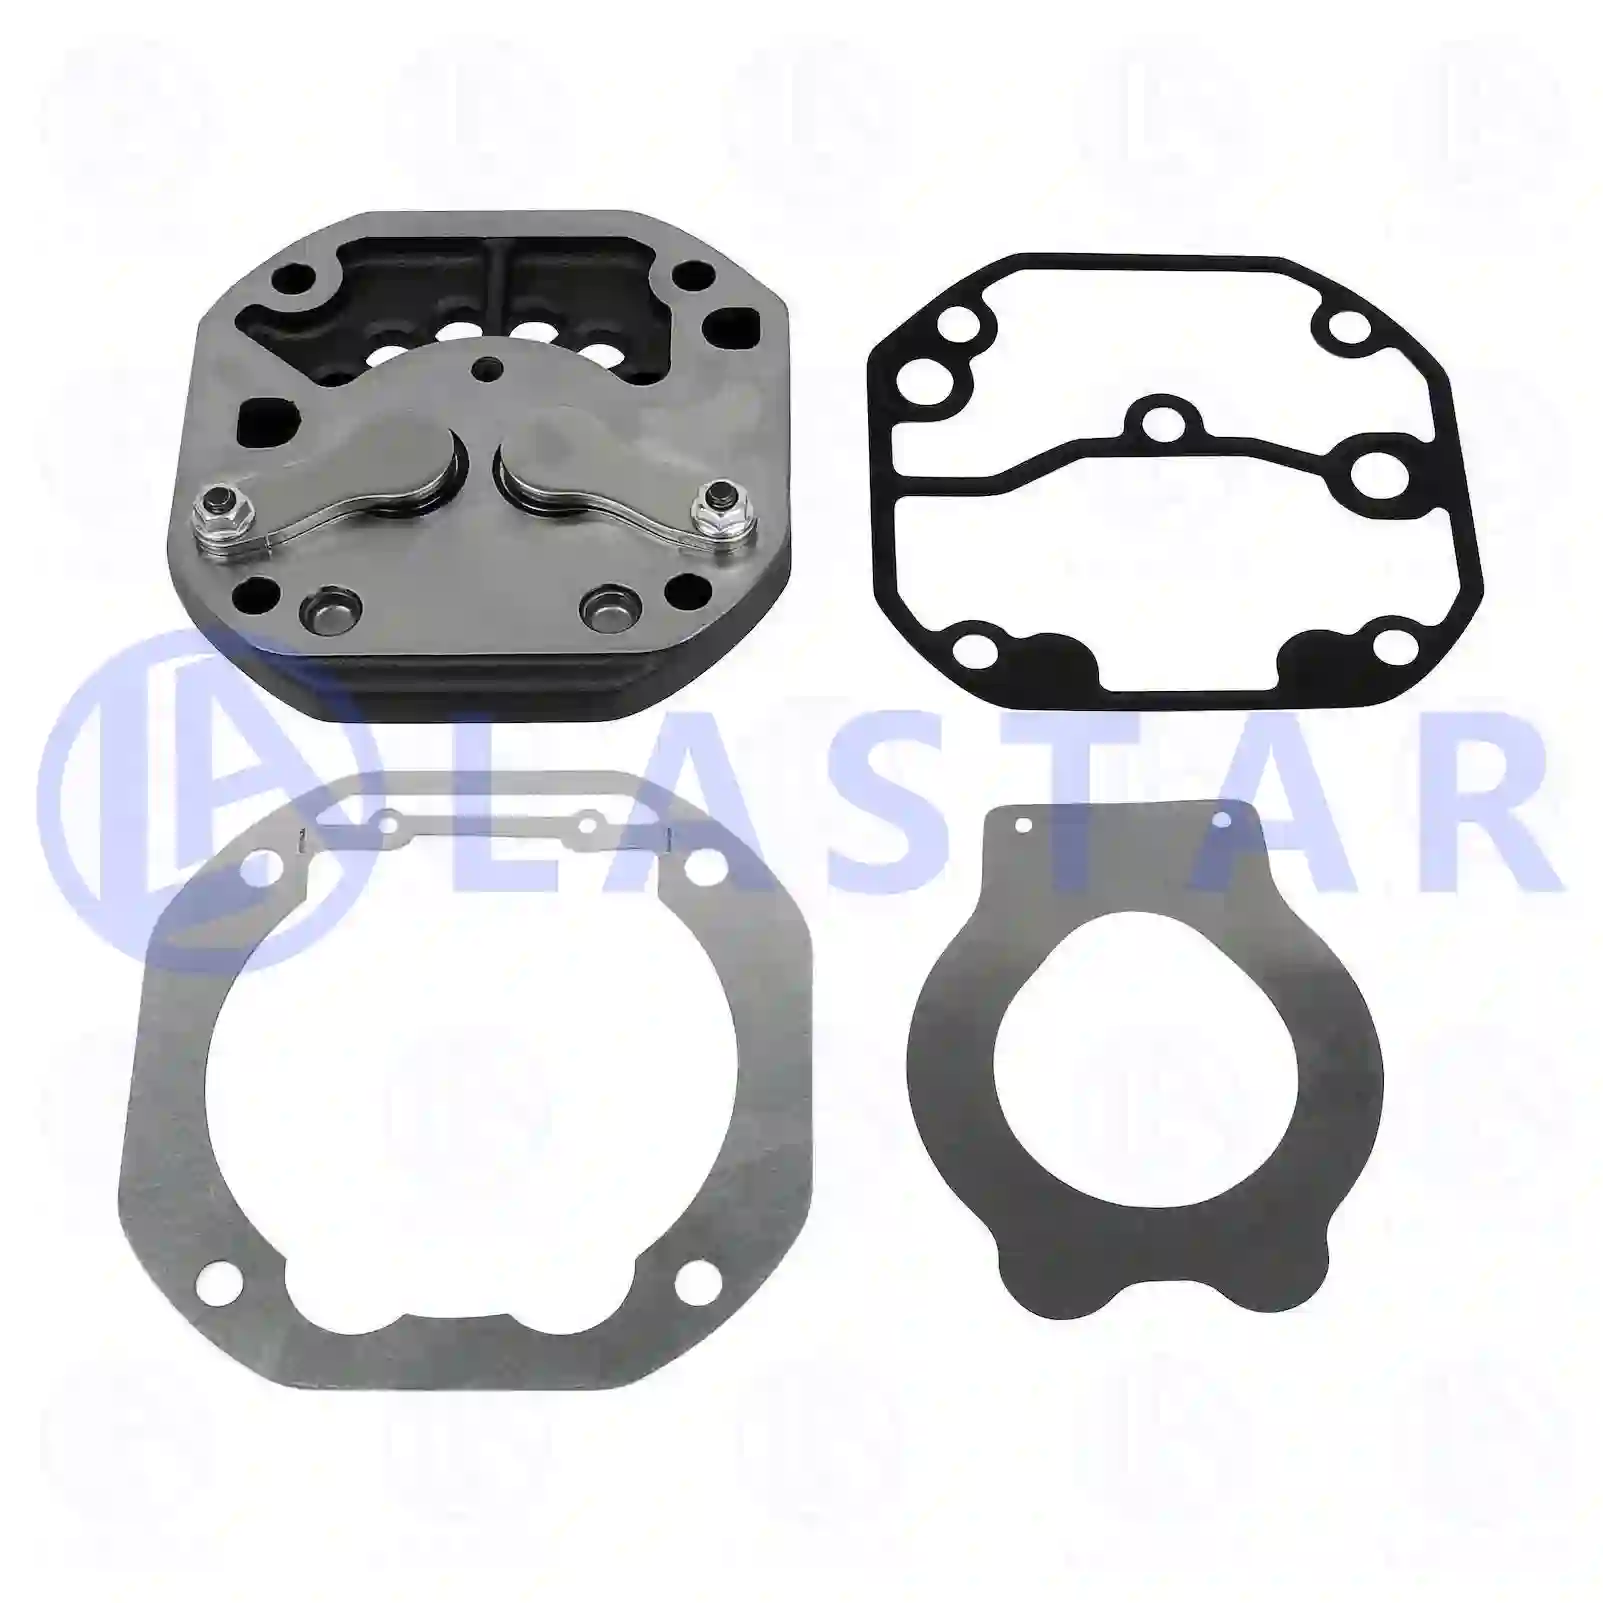 Repair kit, cylinder head, compressor, 77713909, 4411300120, 4411300220, 4421300620 ||  77713909 Lastar Spare Part | Truck Spare Parts, Auotomotive Spare Parts Repair kit, cylinder head, compressor, 77713909, 4411300120, 4411300220, 4421300620 ||  77713909 Lastar Spare Part | Truck Spare Parts, Auotomotive Spare Parts